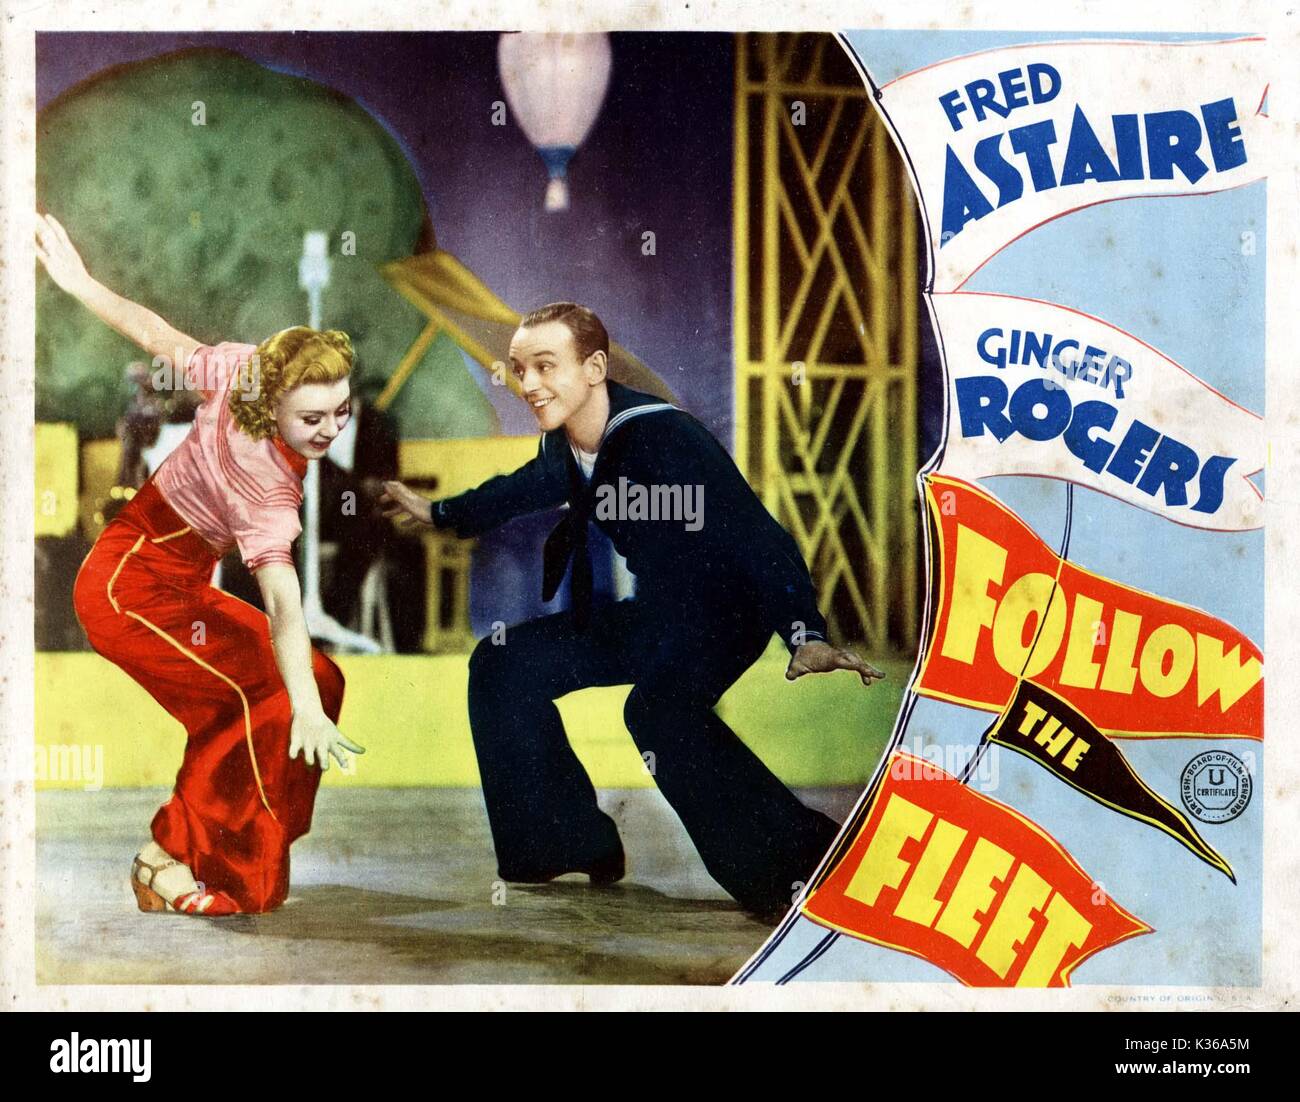 FOLLOW THE FLEET Ginger Rogers and Fred Astaire lobby card from the Ronald Grant Archive     Date: 1936 Stock Photo